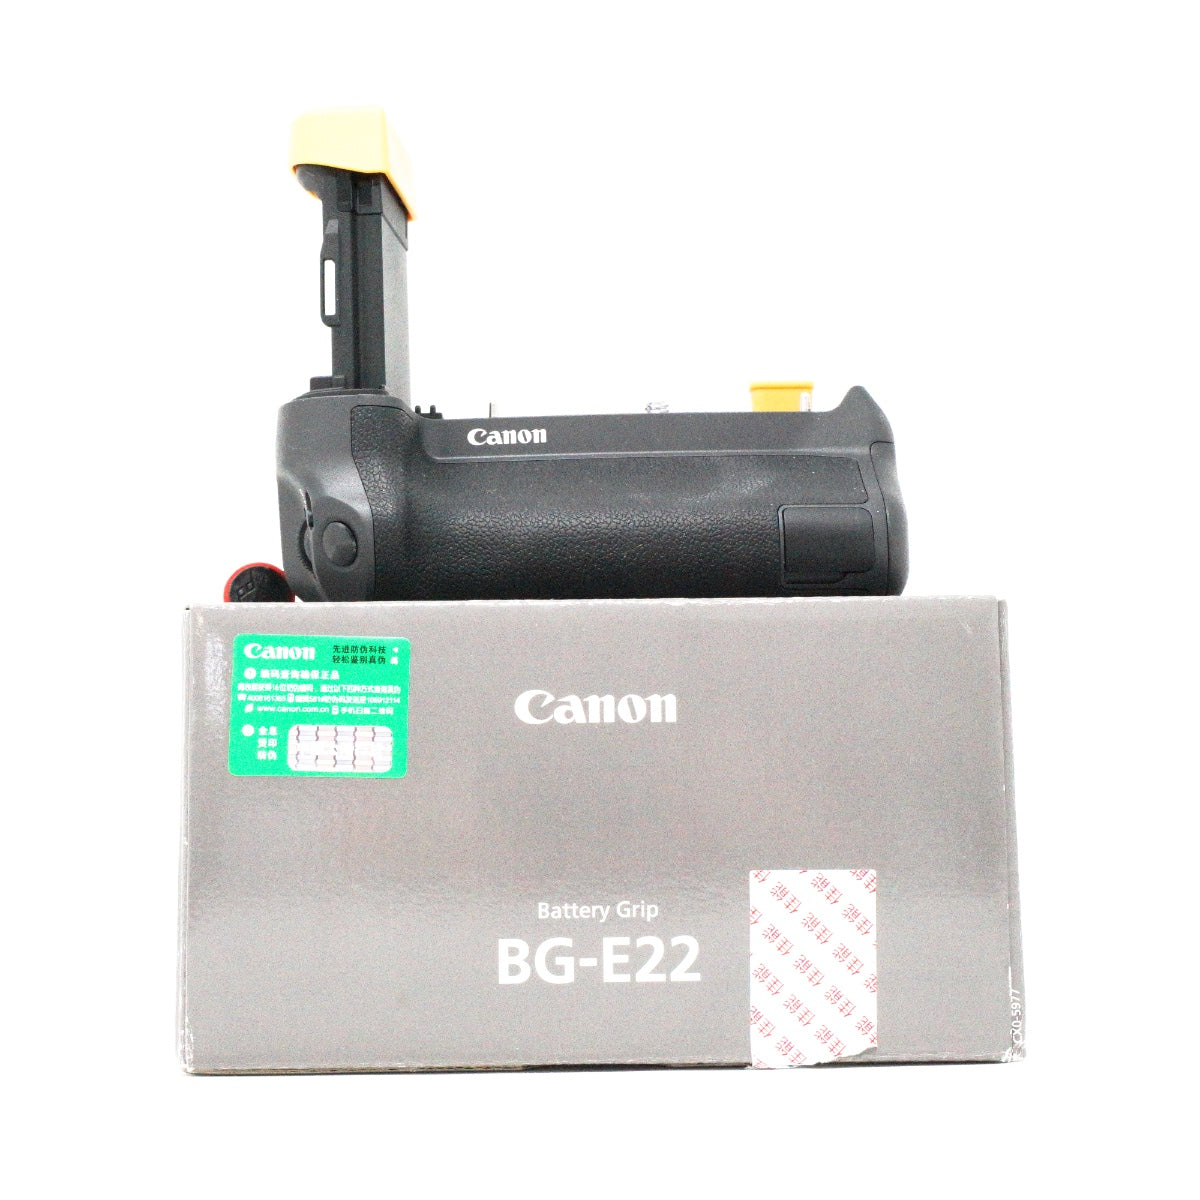 USED Canon BG-E22 Battery Grip for the Canon EOS R